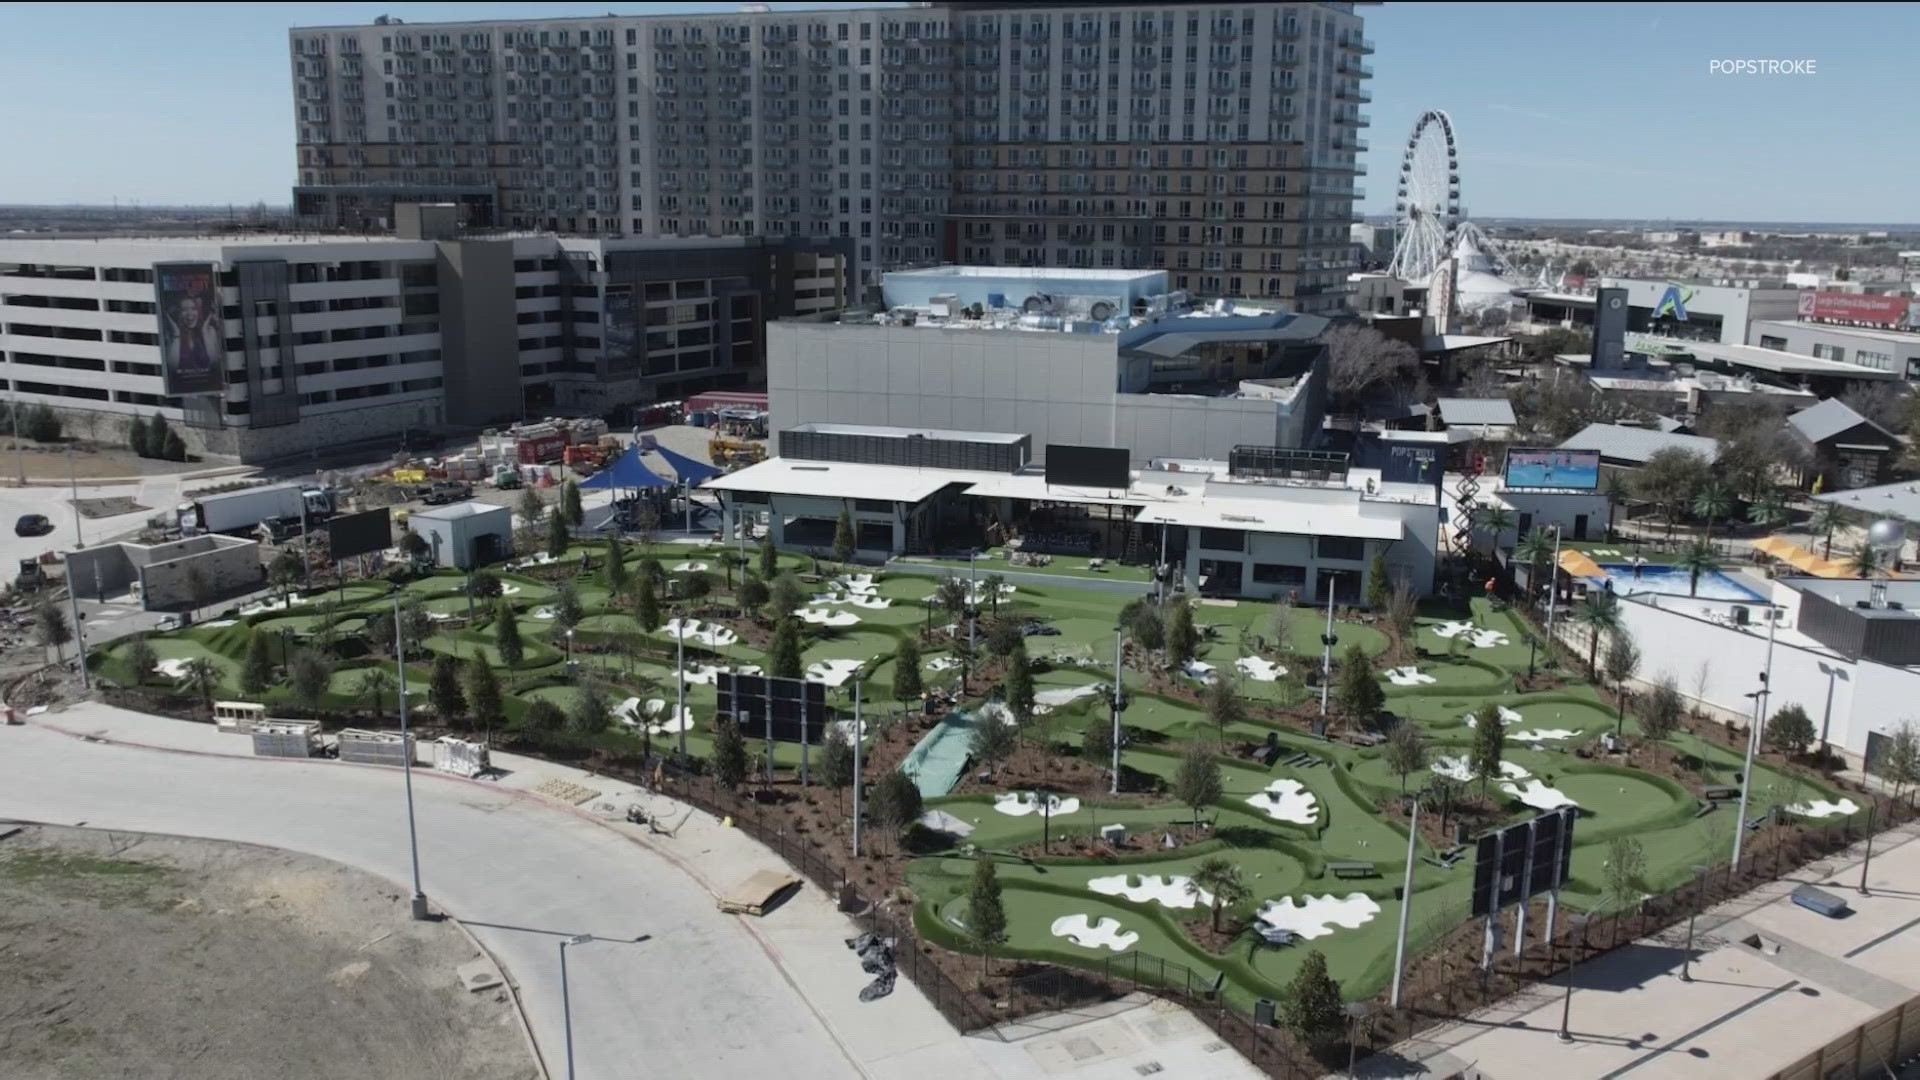 A mini-golf course co-owned by Tiger Woods is set to open in North Texas later in March.